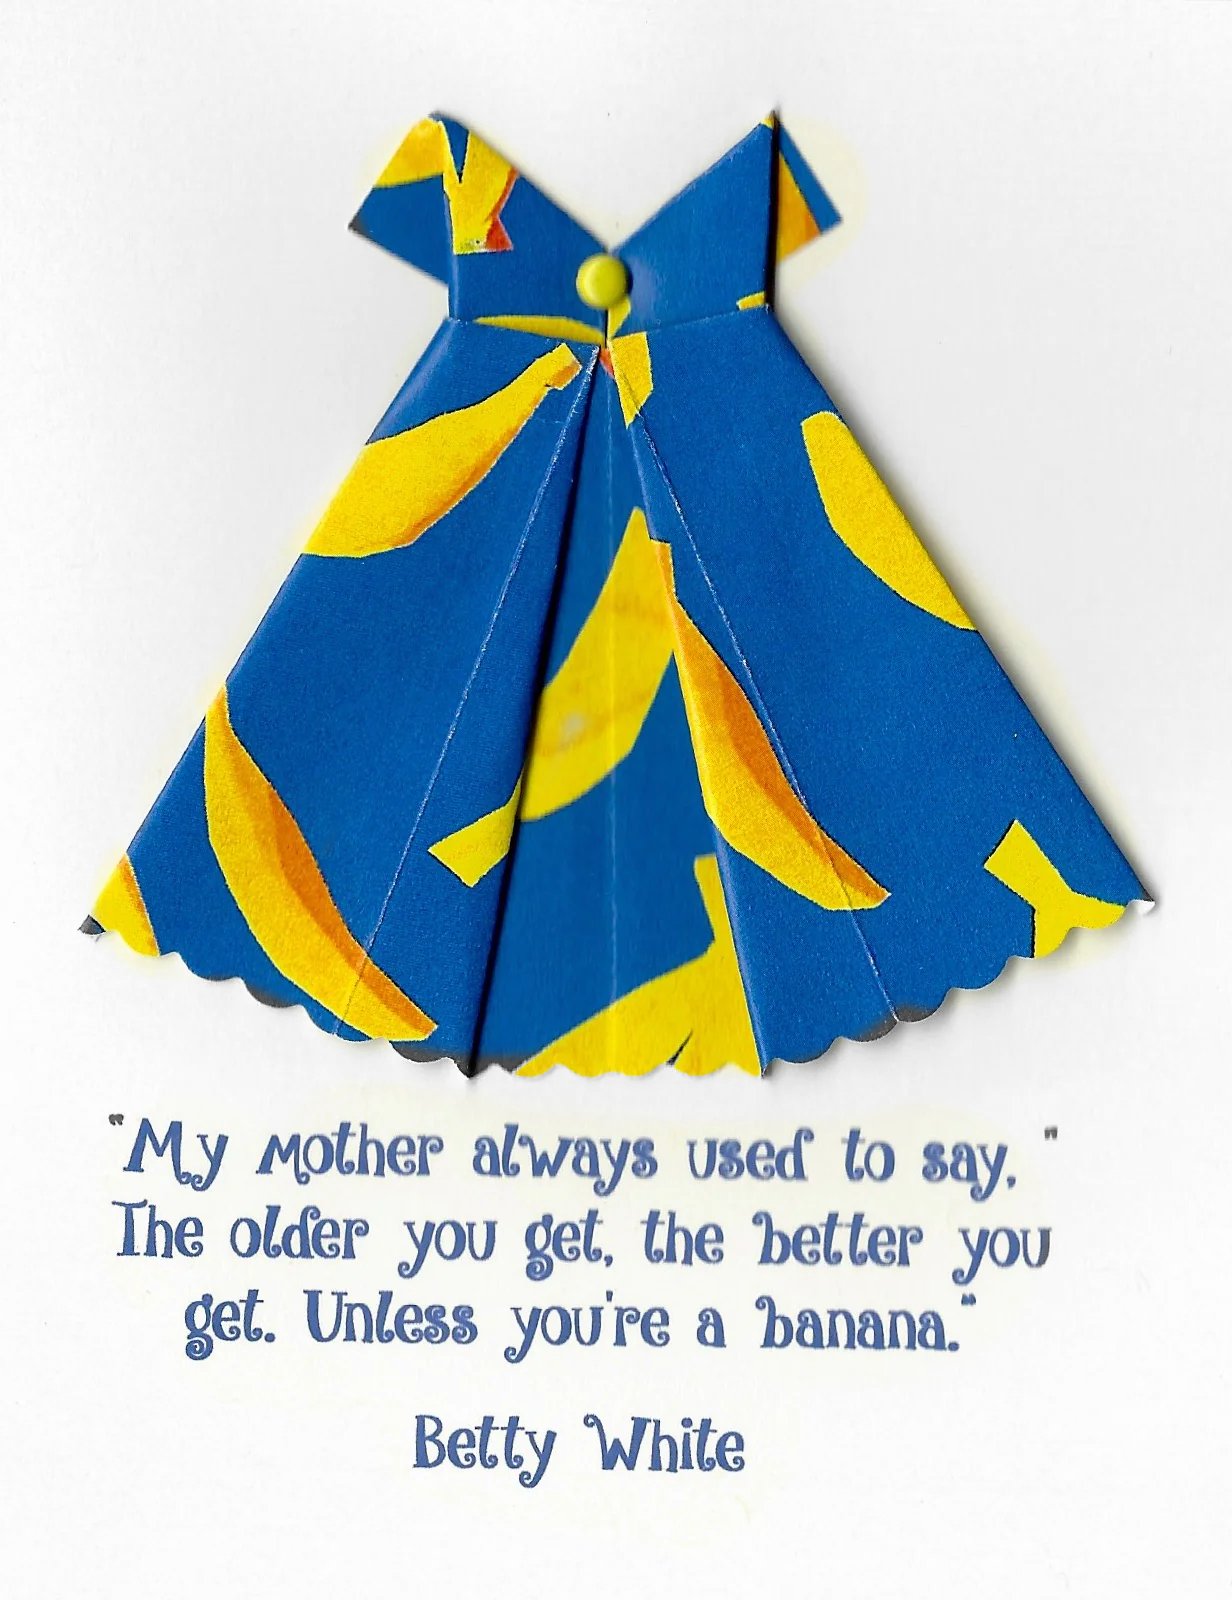 Betty White quote Birthday card with Banana print dress Virginia Fitzgerald